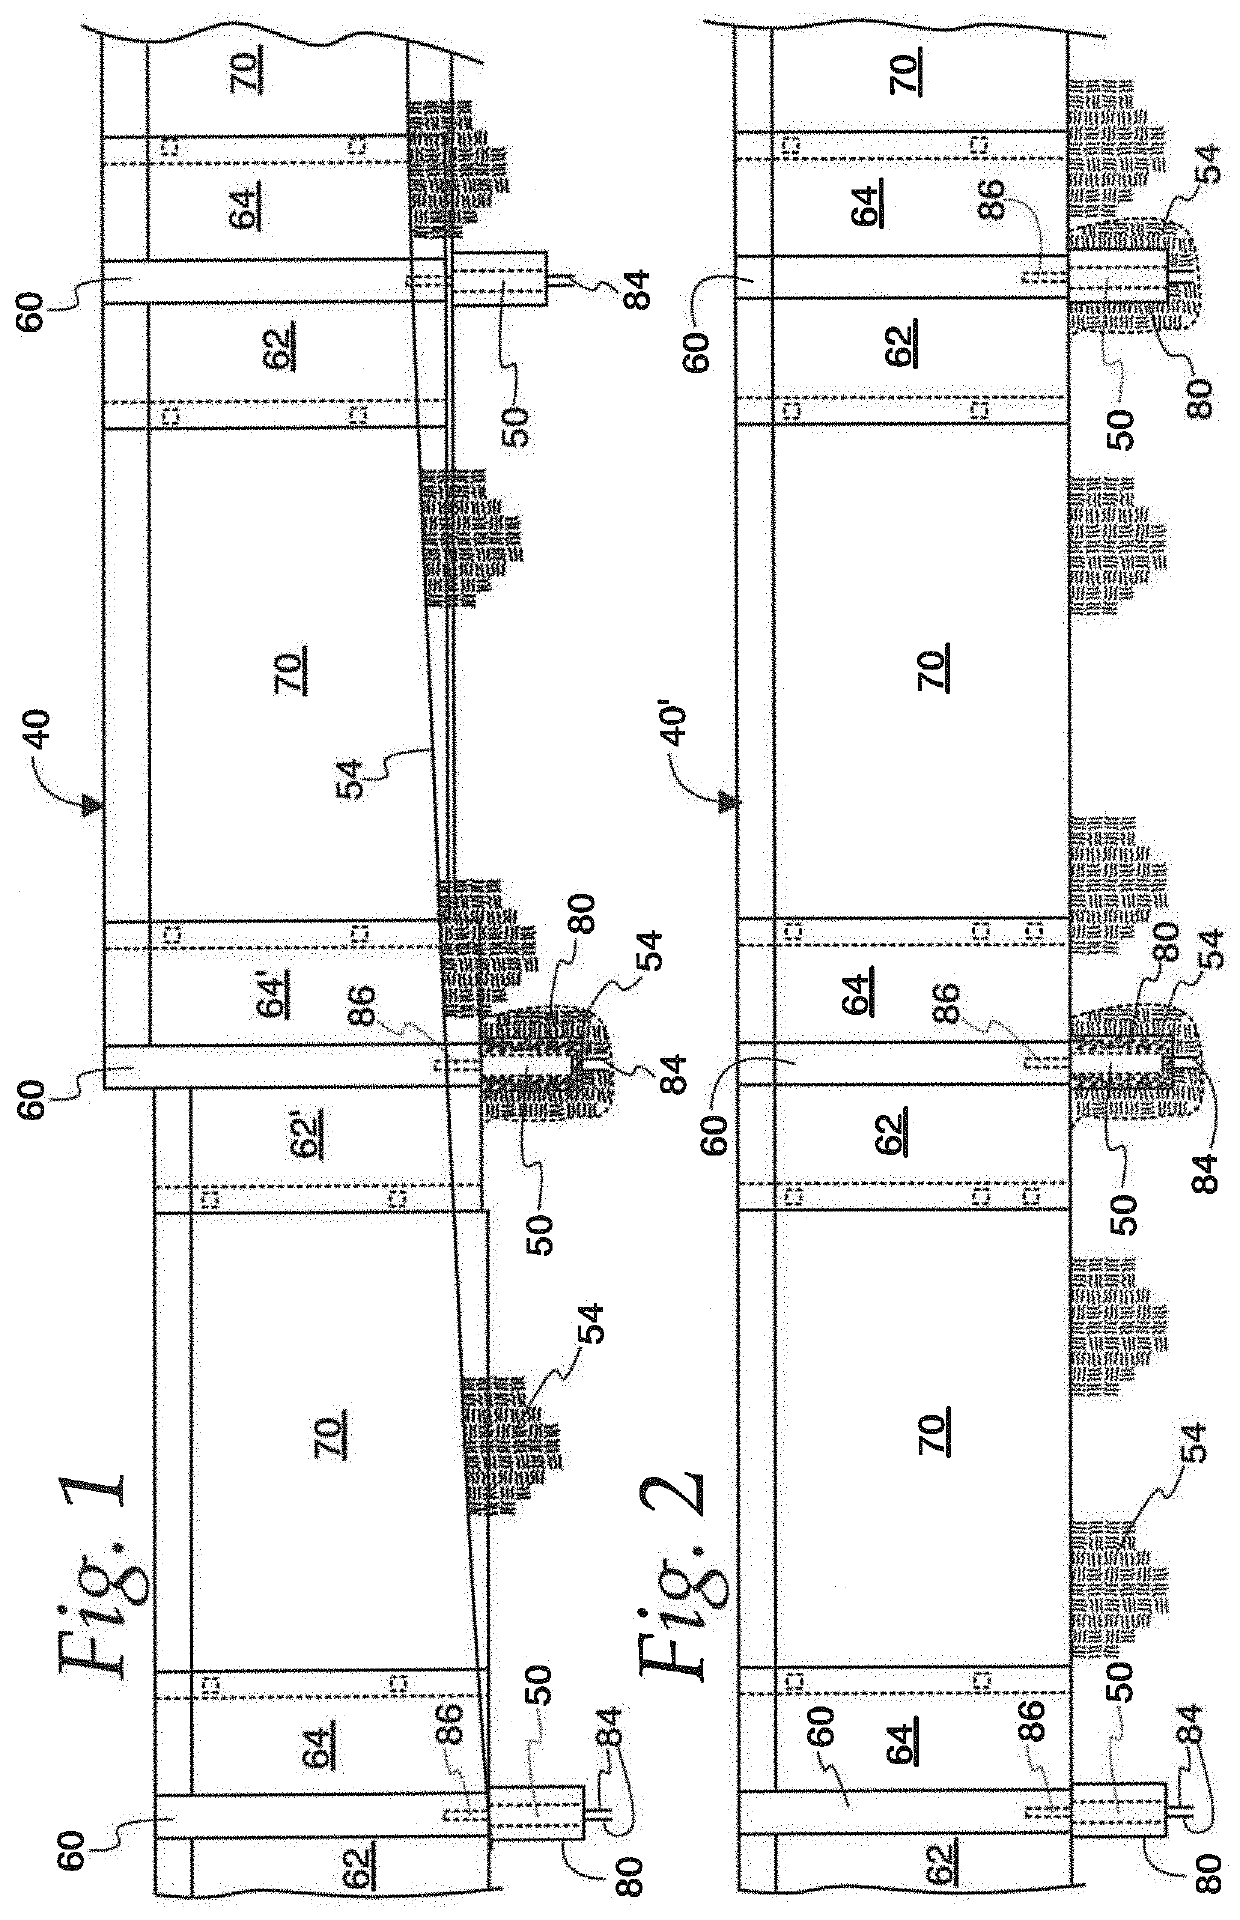 Noise attenuating barrier and method of installing same